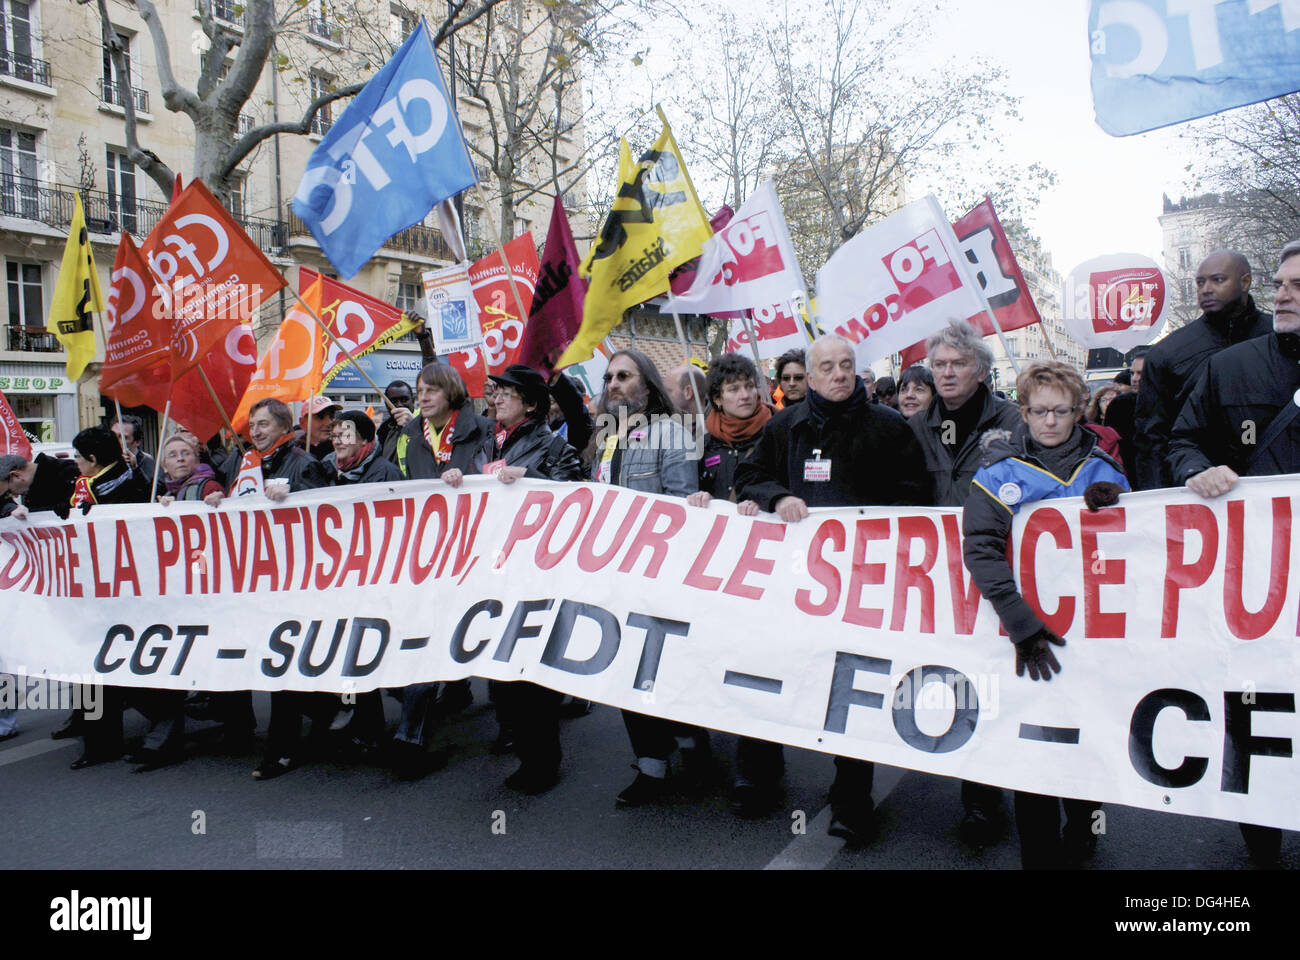 Demonstration in defence of public services and against privatizations, Paris, France (November 2008) Stock Photo